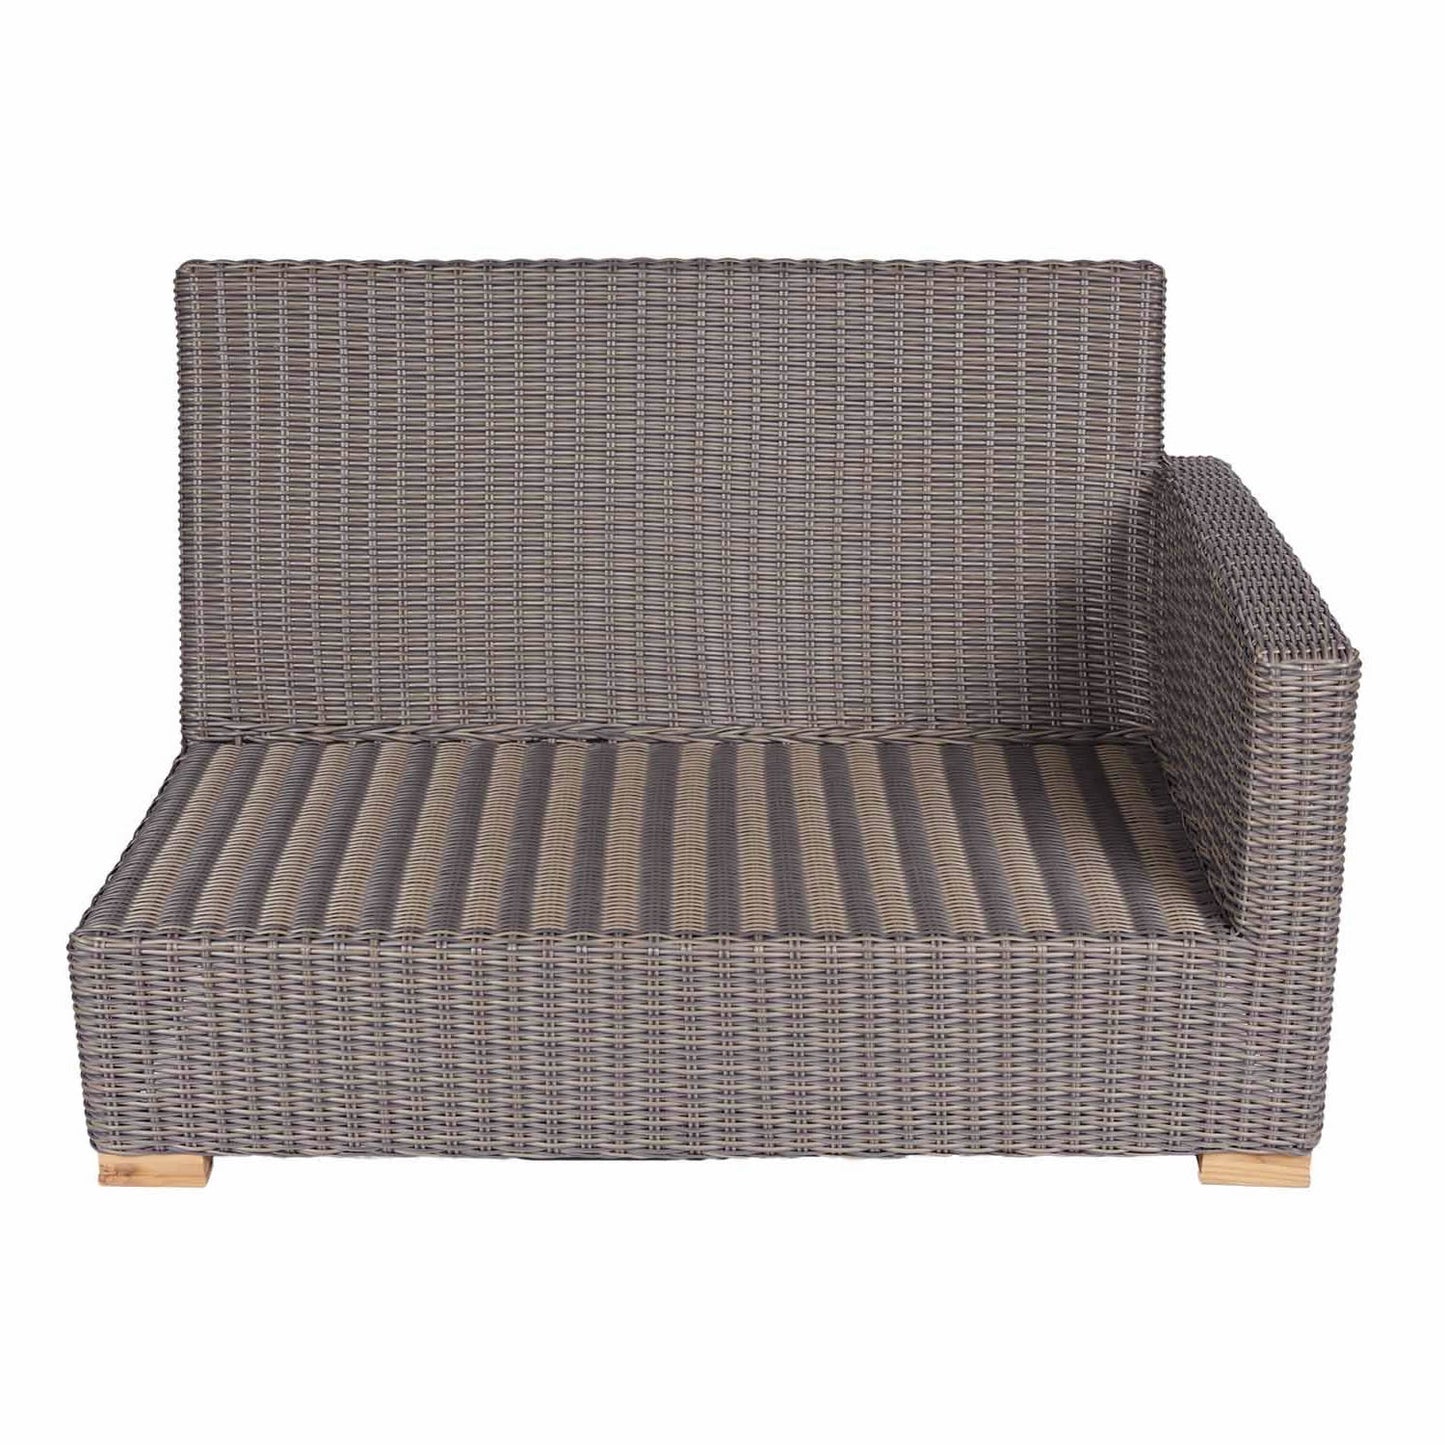 Sanibel Wicker Sectional 2-Seat Right Arm Piece (Frame Only)